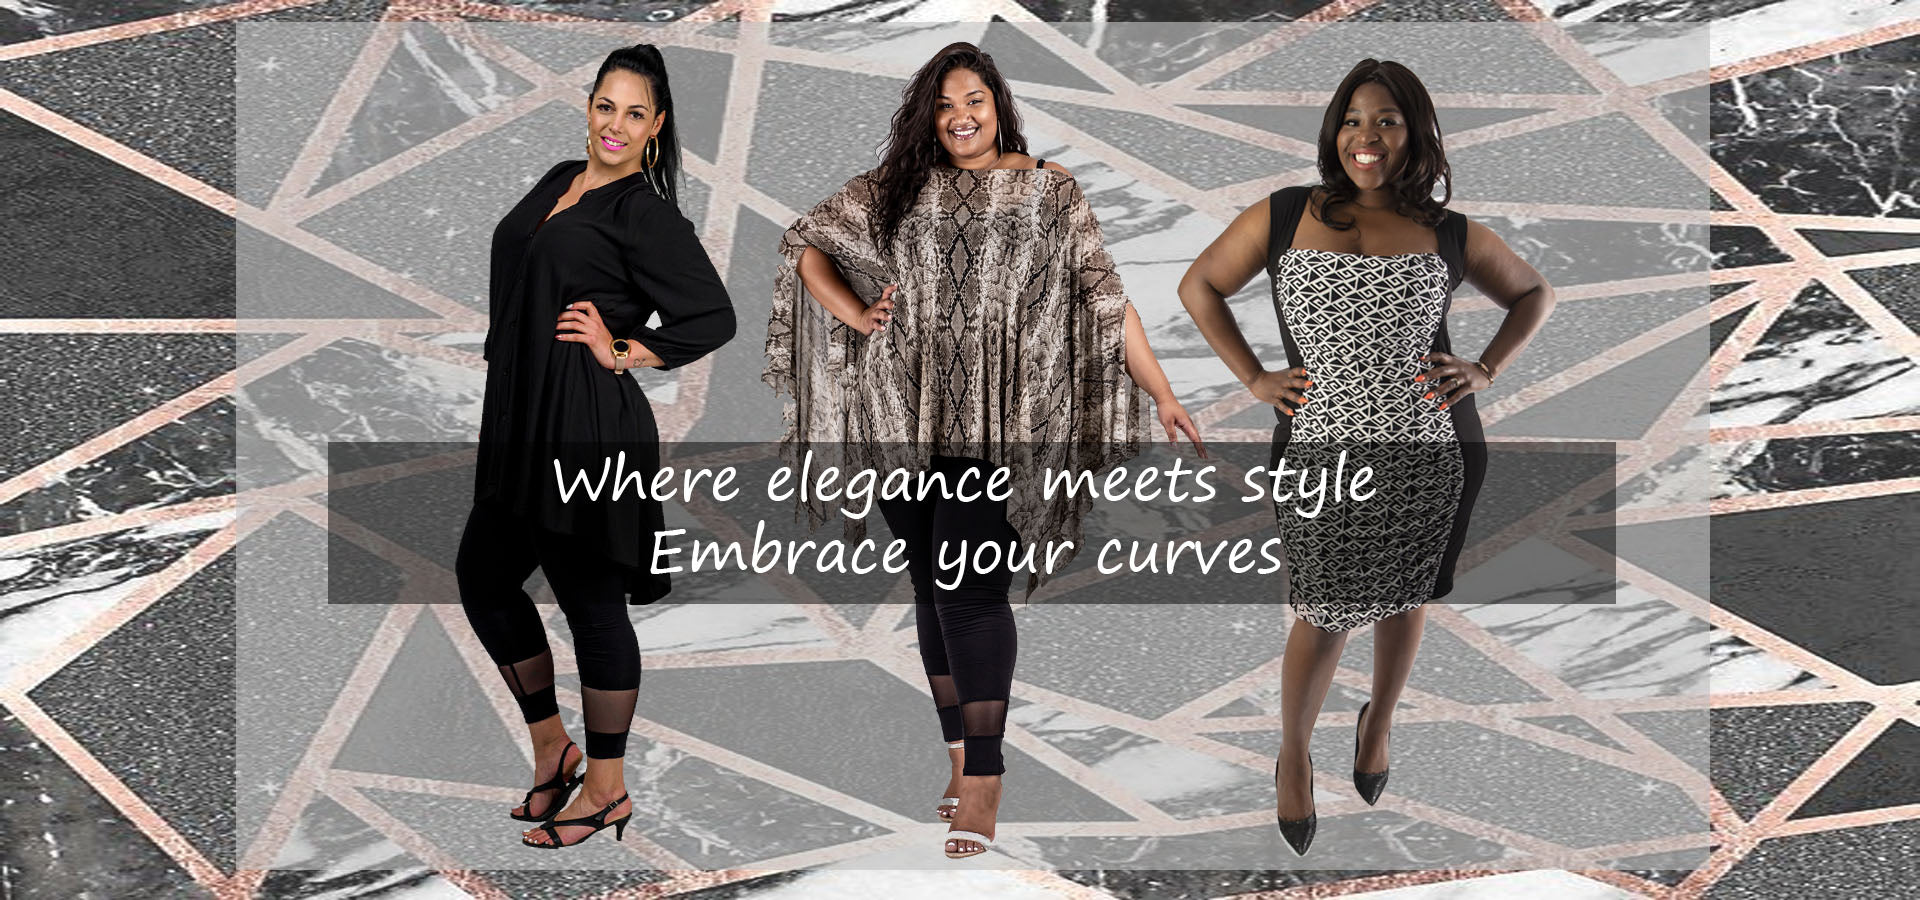 Plus size clothing for curvy women